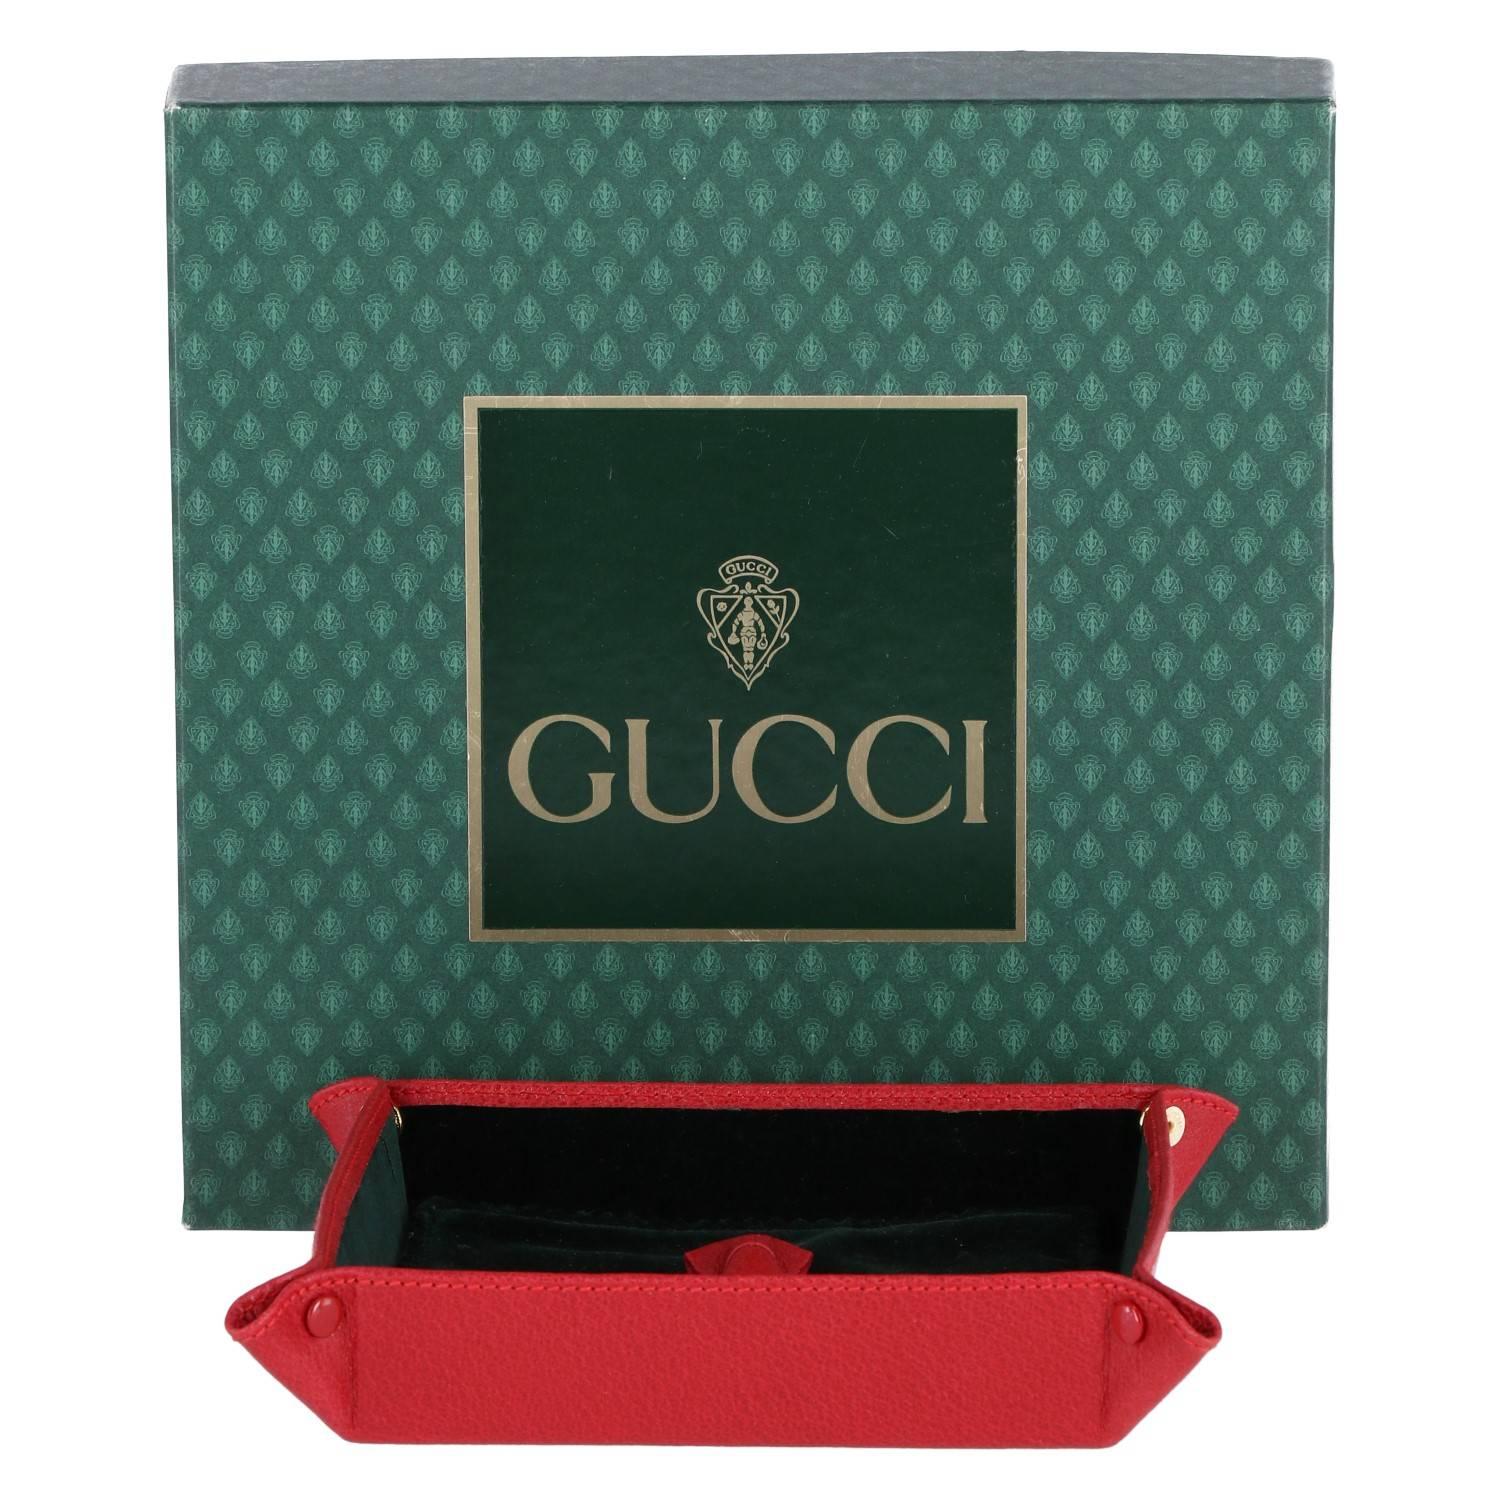 Feminine Gucci square pocket emptier in red leather and lined in green velvet. It includes a green velvet flap, decorated with a red leather bow. The item was produced in the 2000s and is in excellent conditions. It includes the original Gucci